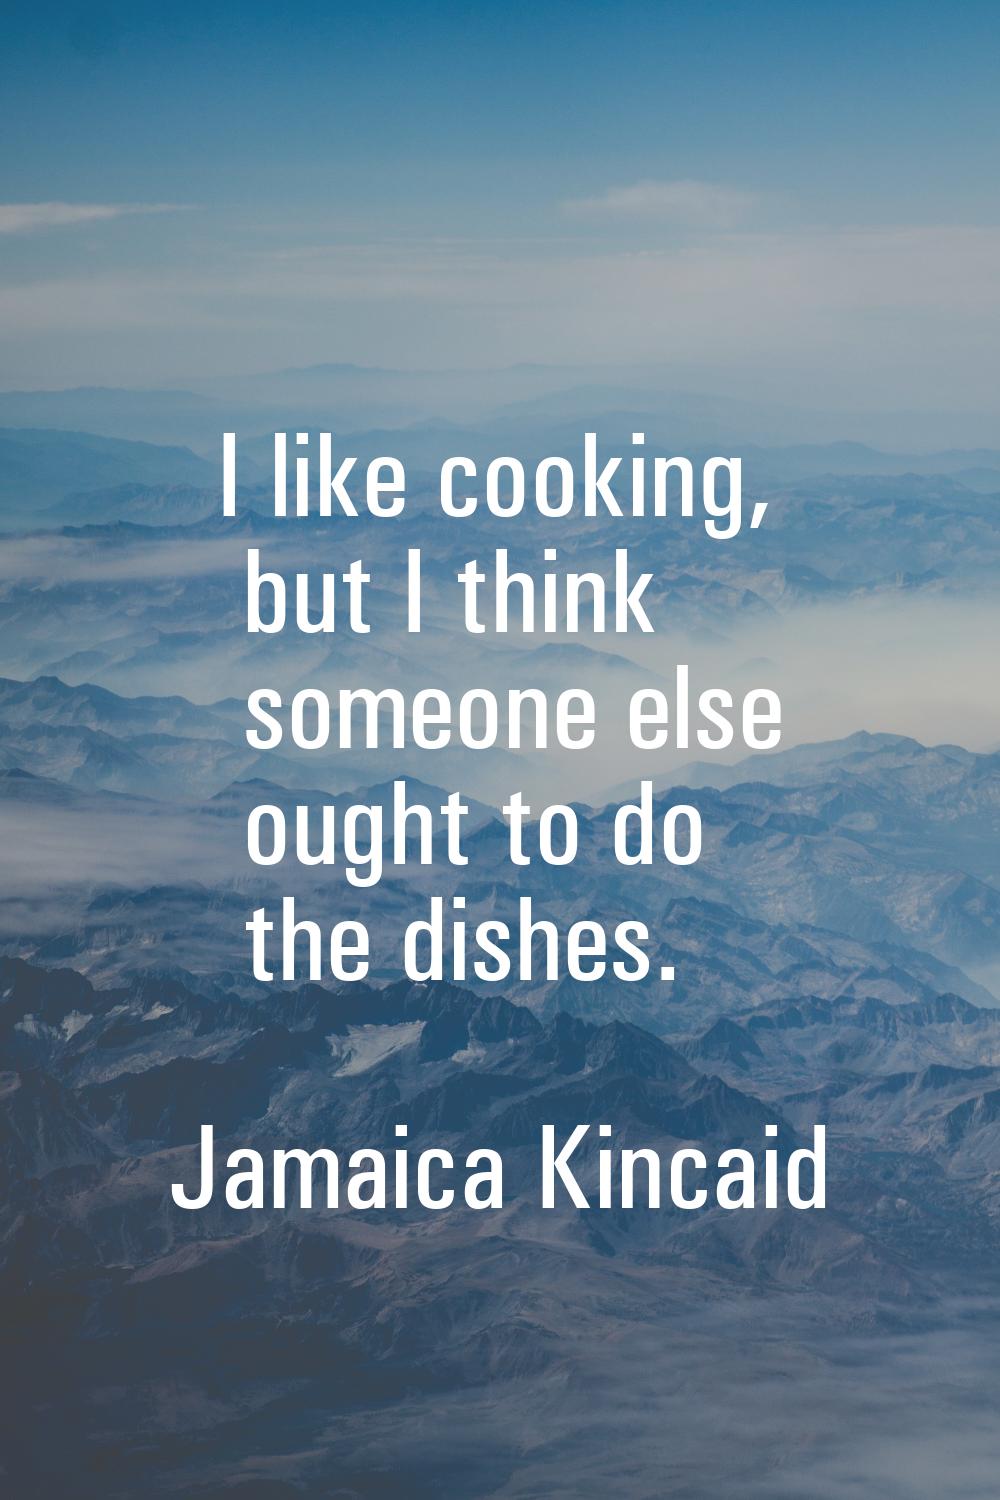 I like cooking, but I think someone else ought to do the dishes.